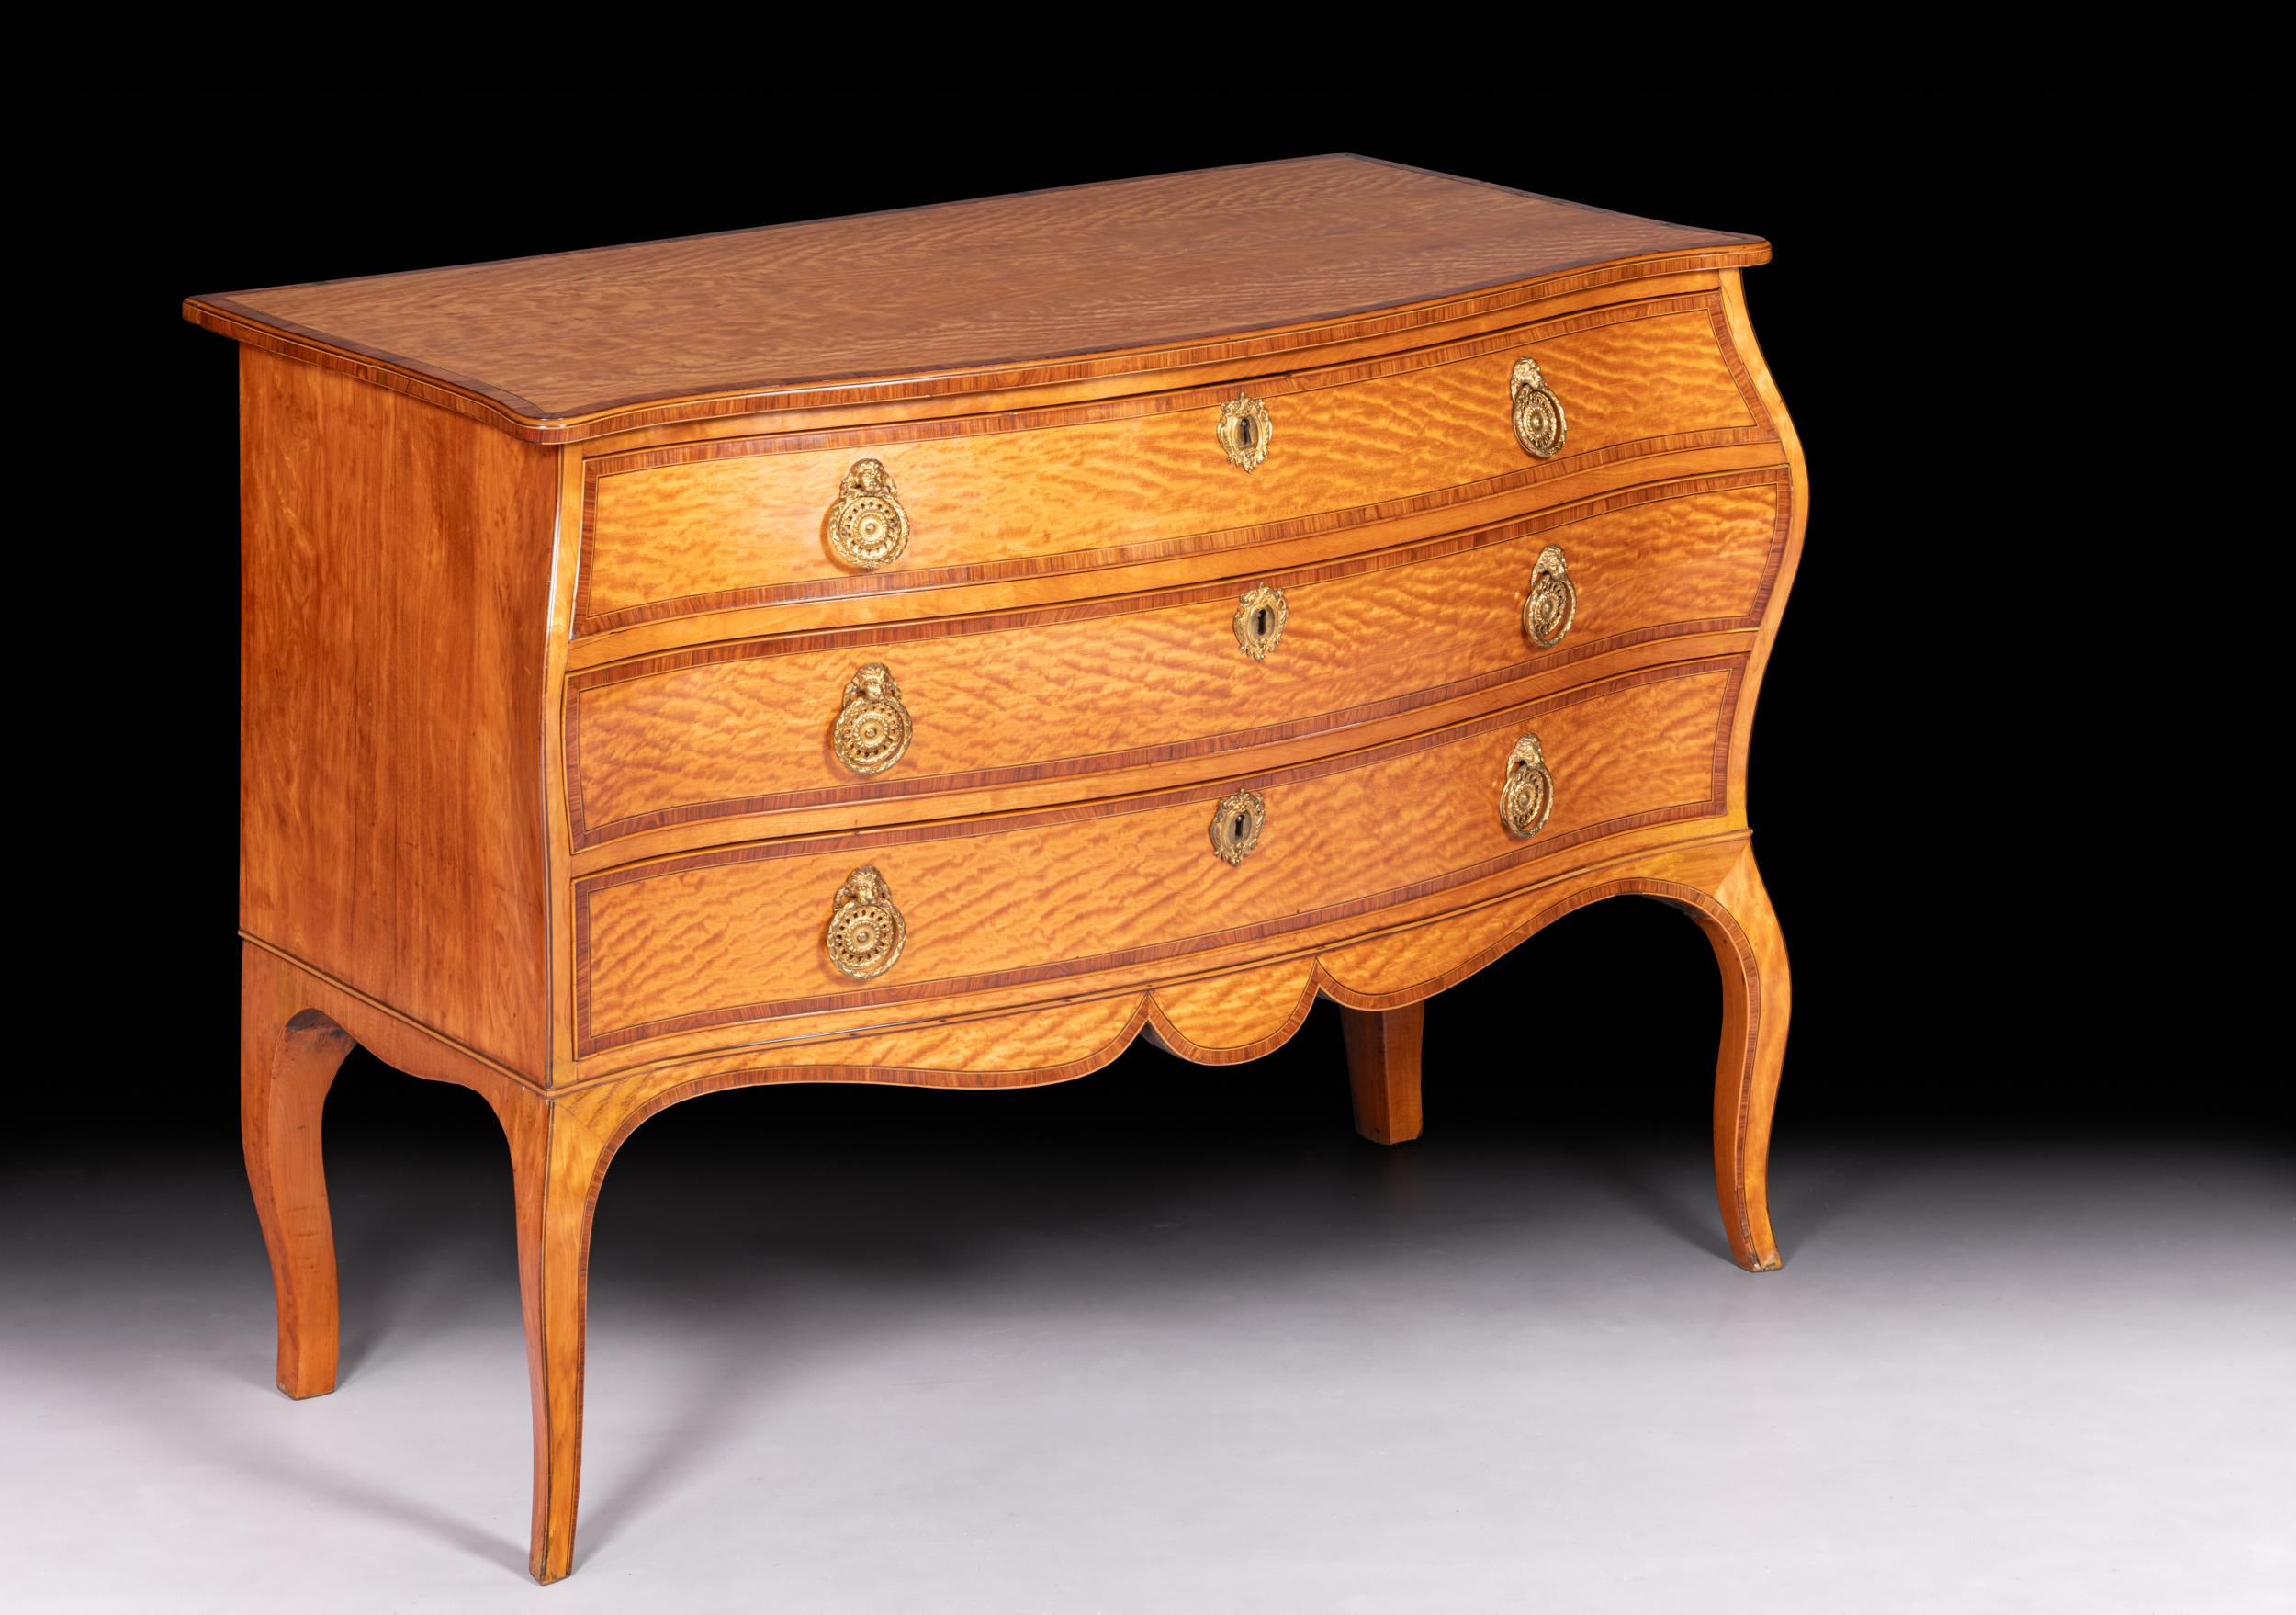 An exceptional George III Satinwood serpentine shaped commode, the serpentine top with out-swept front corners cross-banded in kingwood. The kingwood moulded border frame around central panels of book-matched satinwood veneers, above three graduated